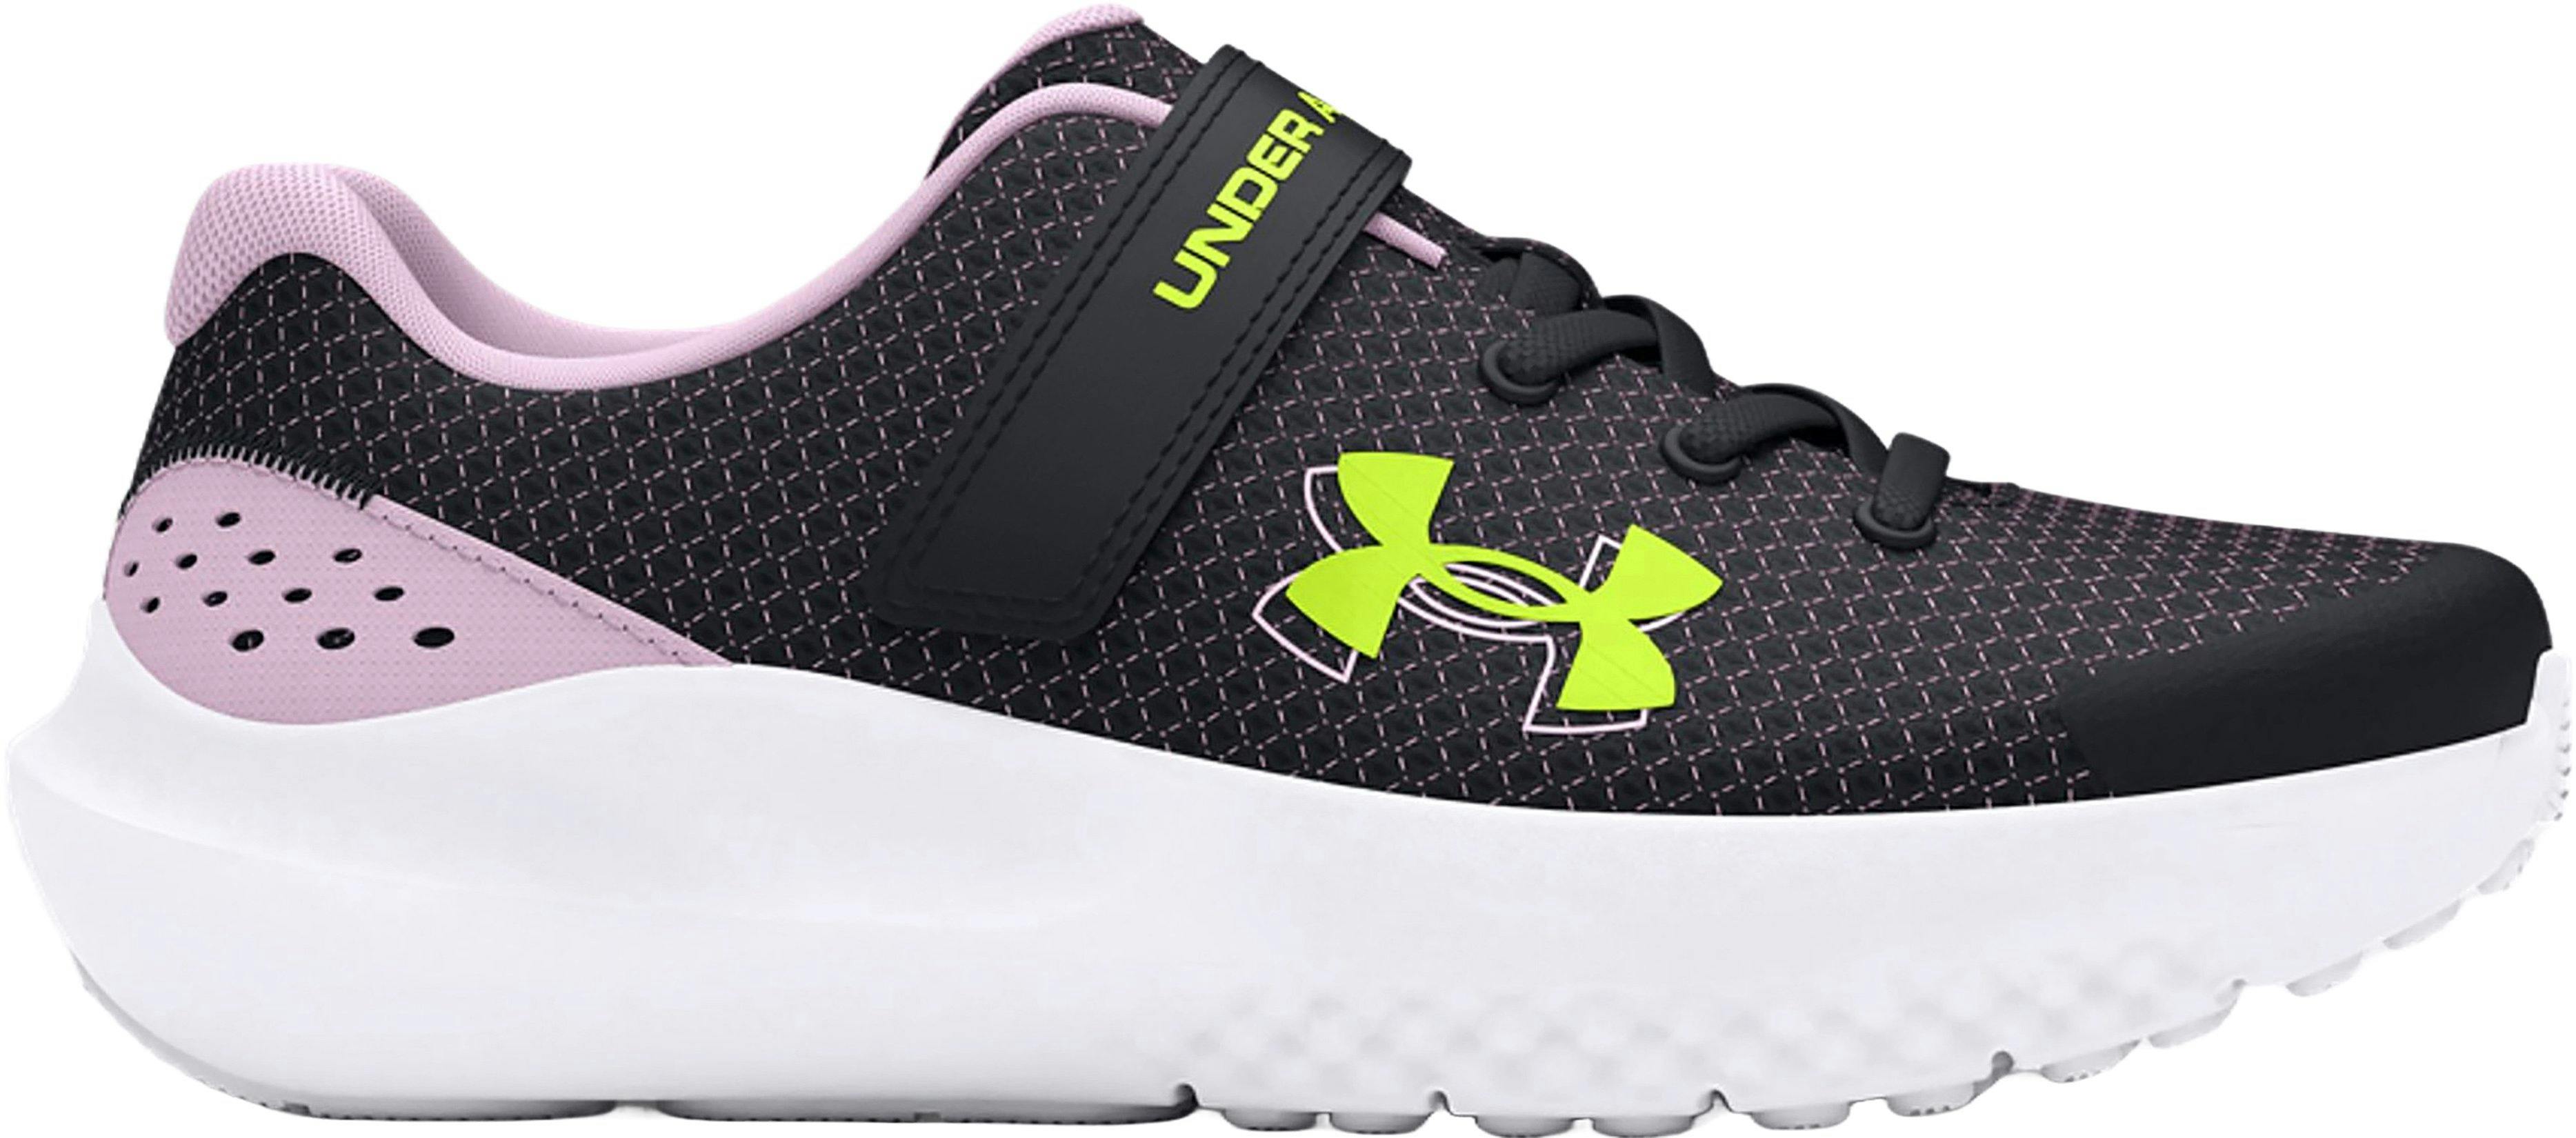 Product image for Pre-School UA Surge 4 AC Running Shoes - Girls